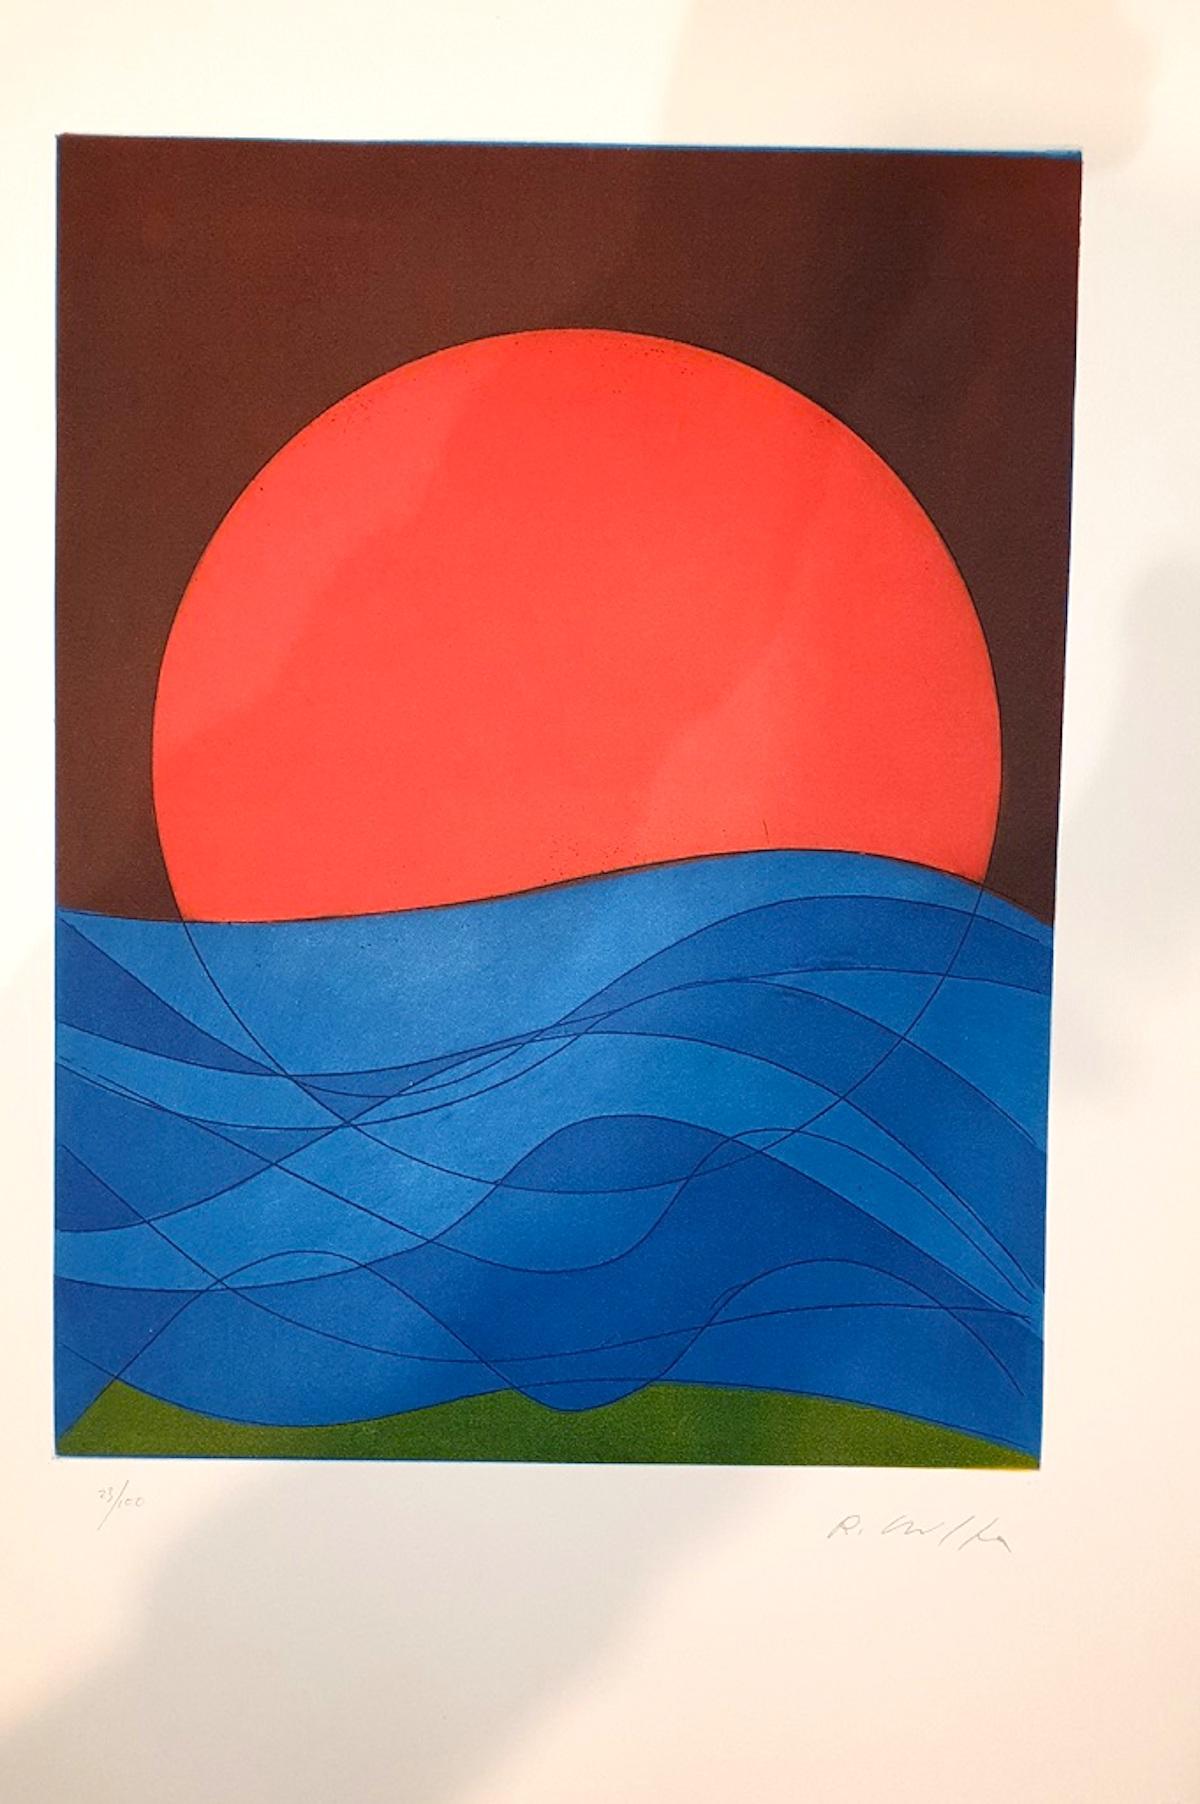 Roberto Crippa Abstract Print - Plate I from Suns/Landscapes - Etching by R. Crippa - 1971/72